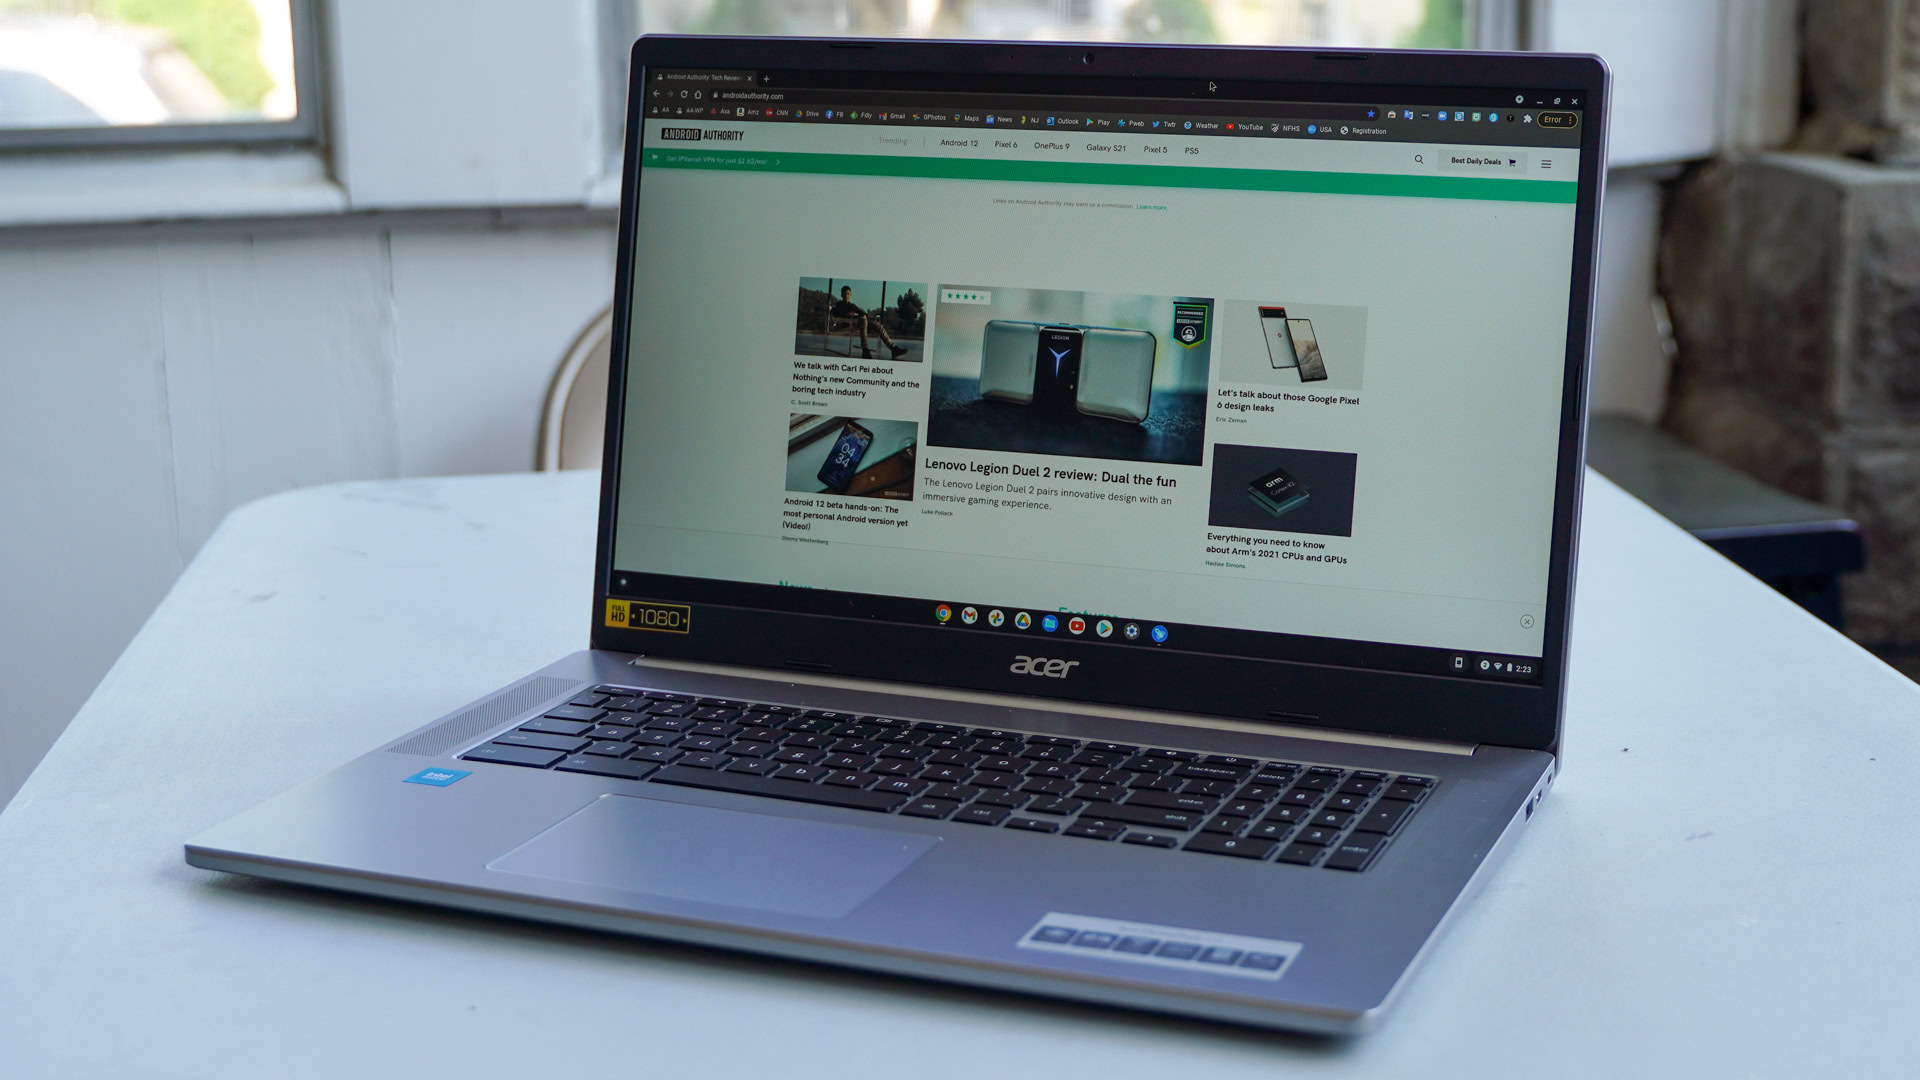 Good news: Chrome OS moves to faster update schedule